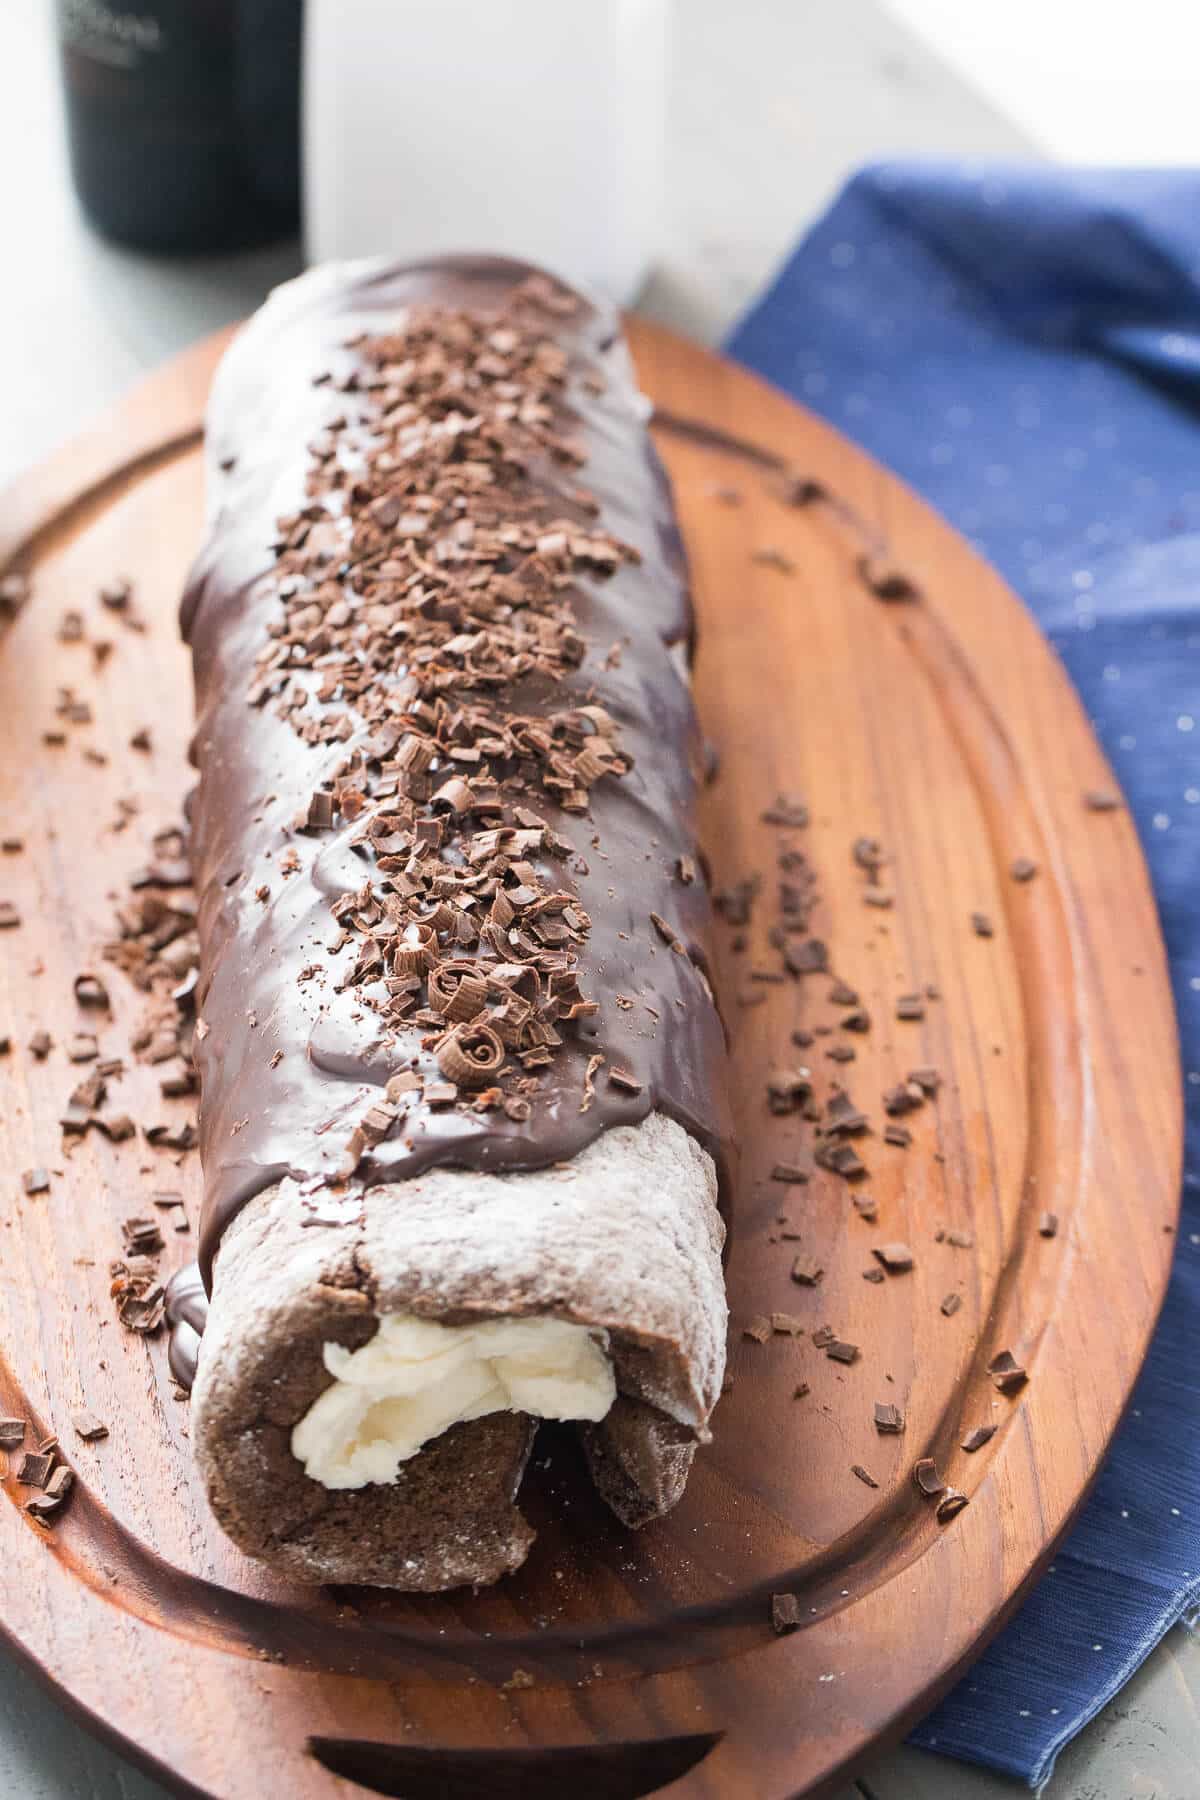 This chocolate roll has a hint of mocha and a creamy Bailey's filling! The Baileys ganache sets it apart!